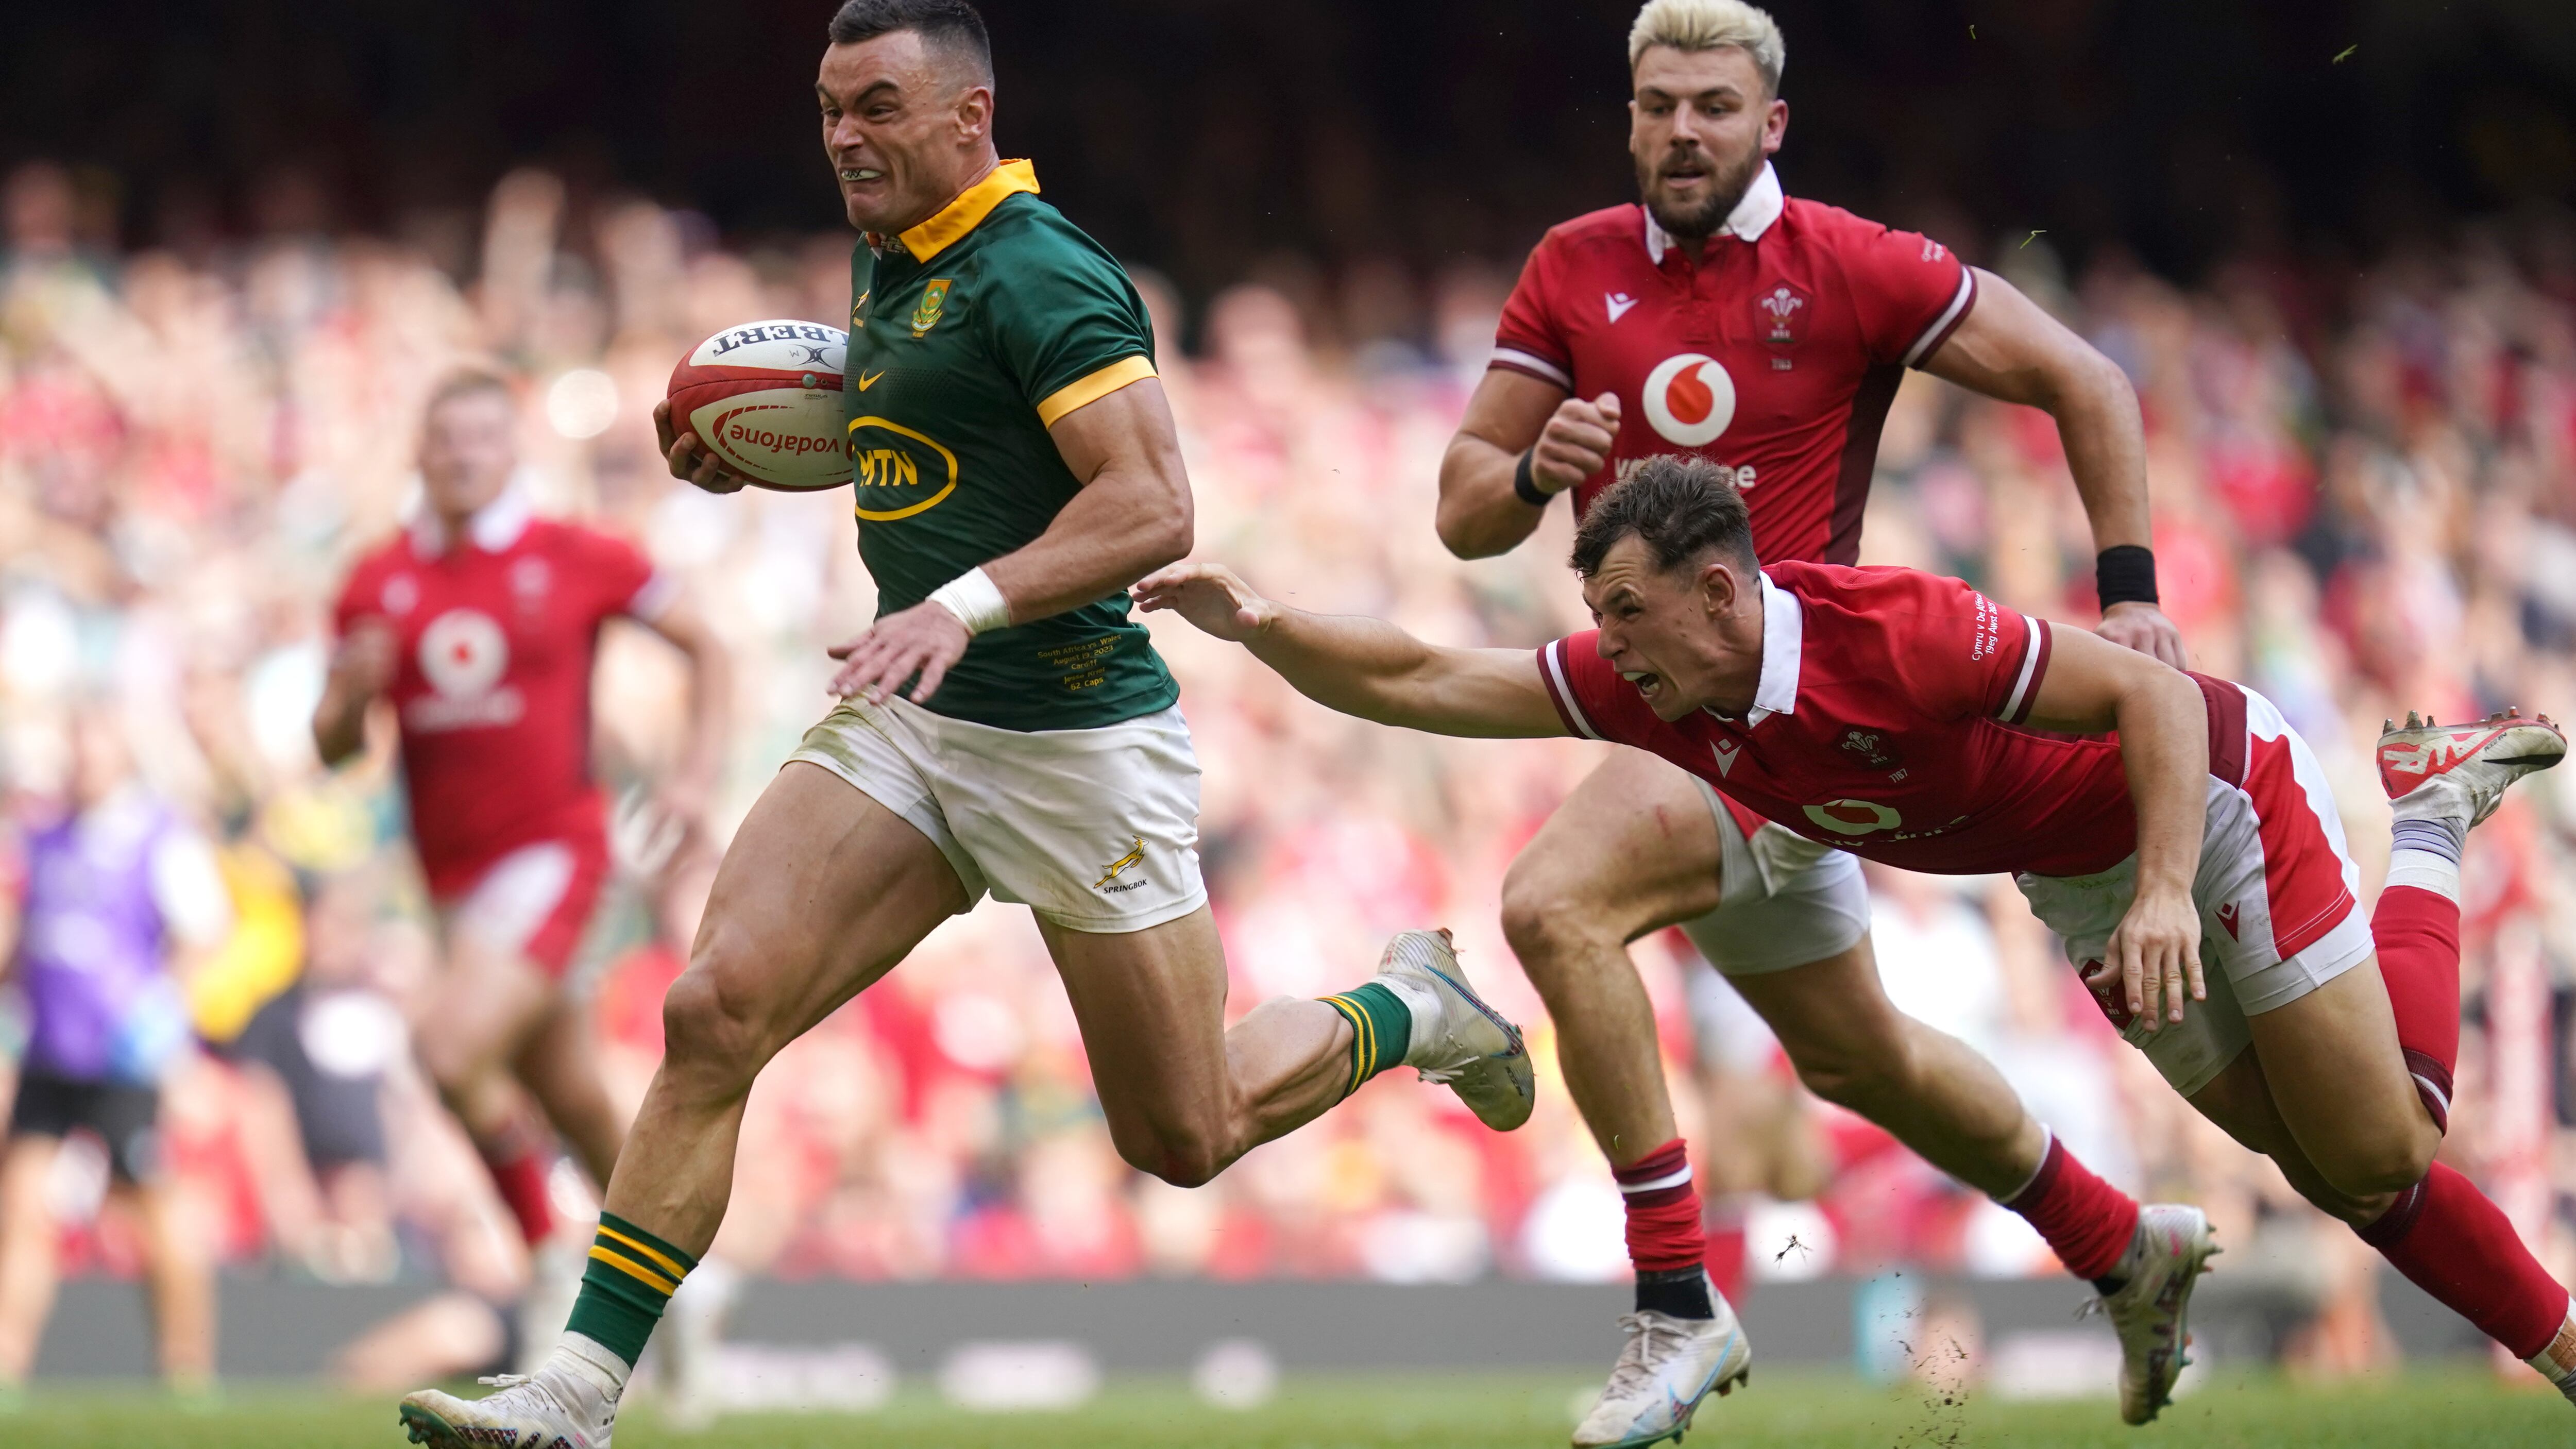 Wales face a testing encounter against South Africa at Twickenham